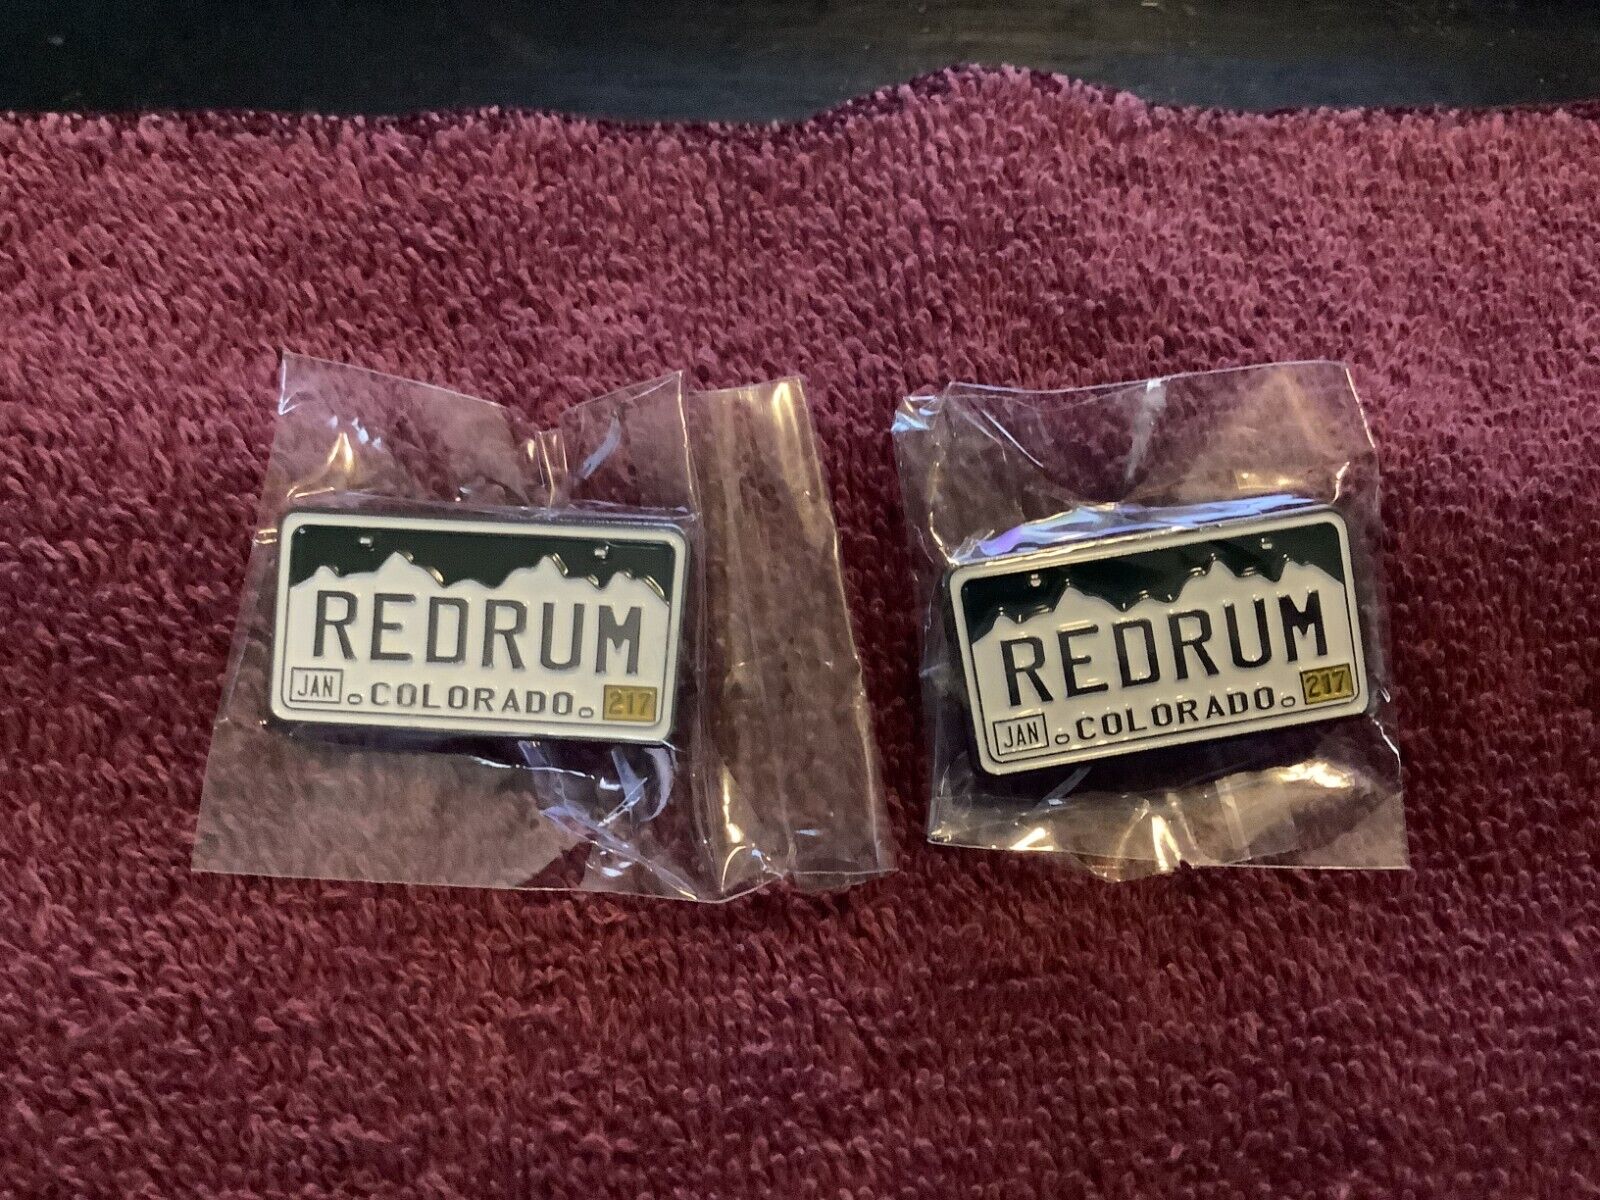 Lot of 2 The Shining REDRUM Colorado License Plate Enamel Pins New